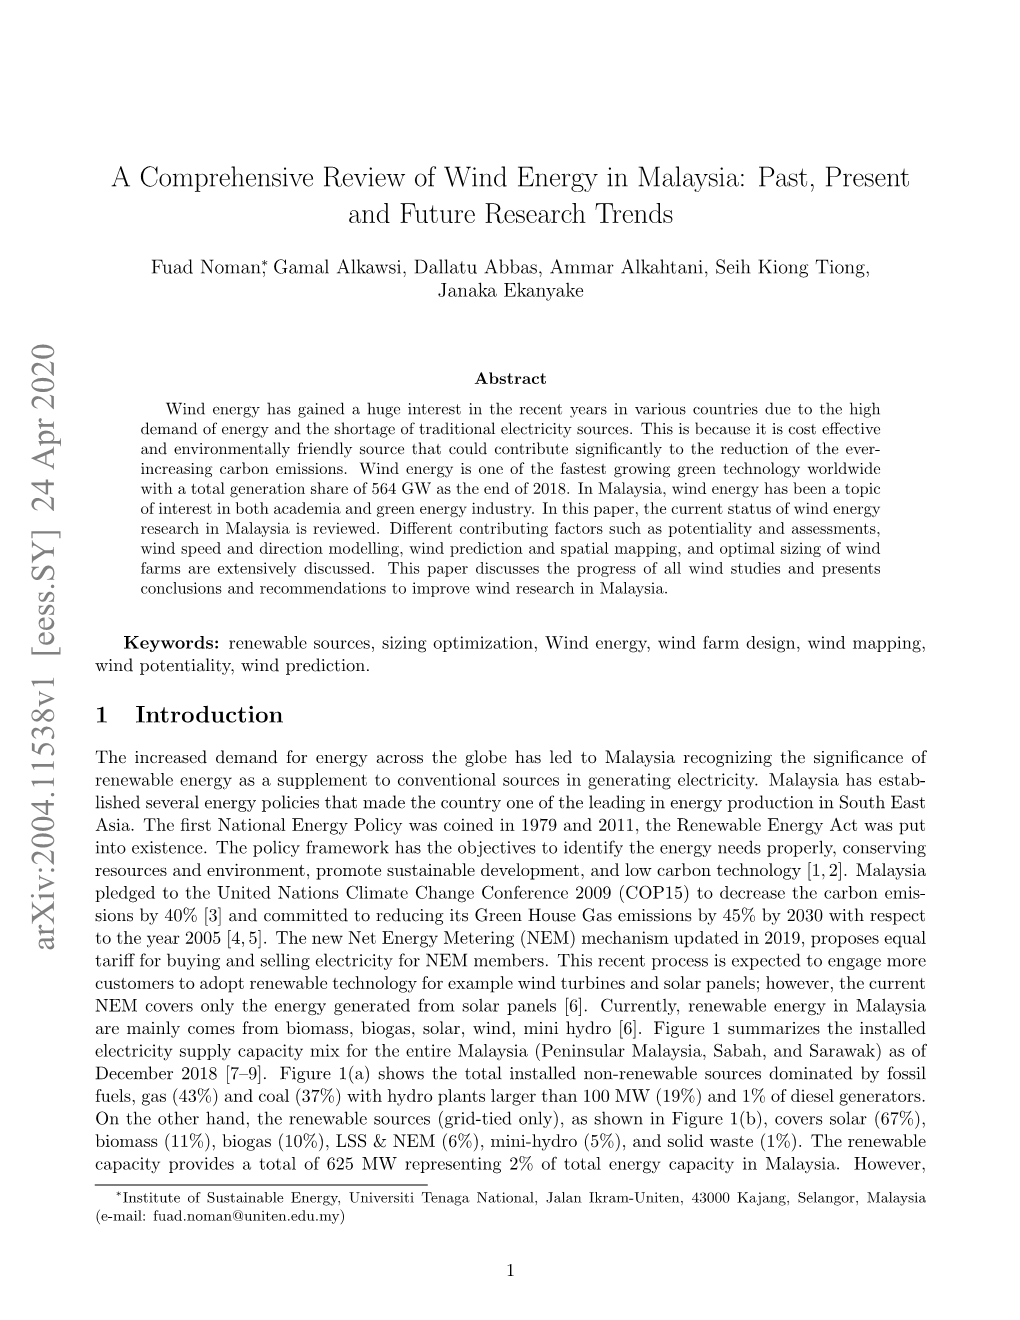 A Comprehensive Review of Wind Energy in Malaysia: Past, Present and Future Research Trends